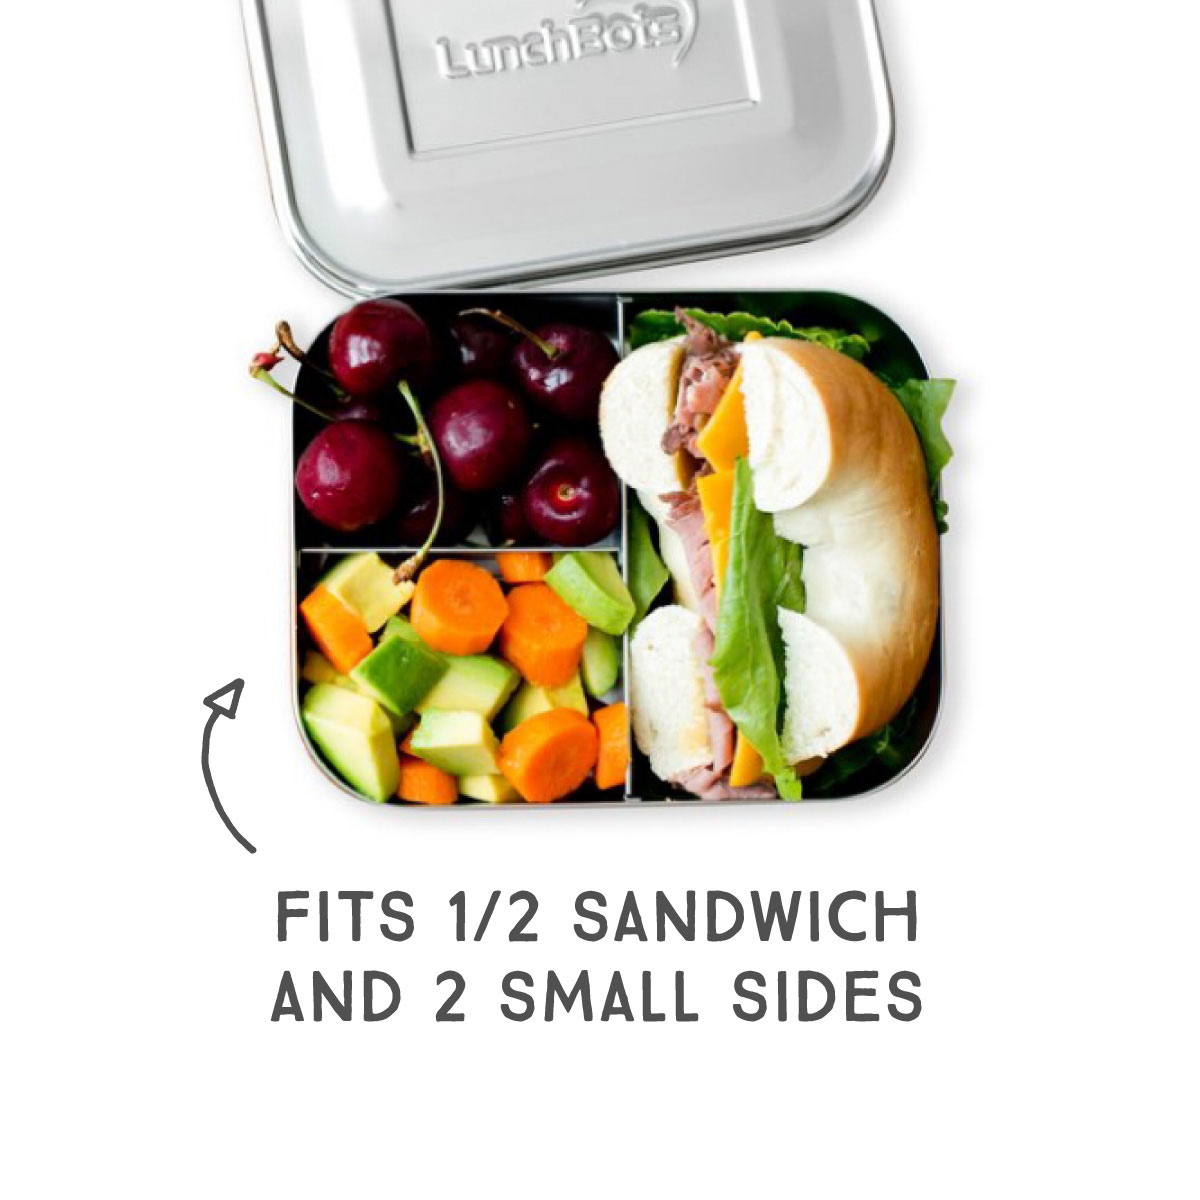 Stainless Steel Three-in-One Bento Lunch Box